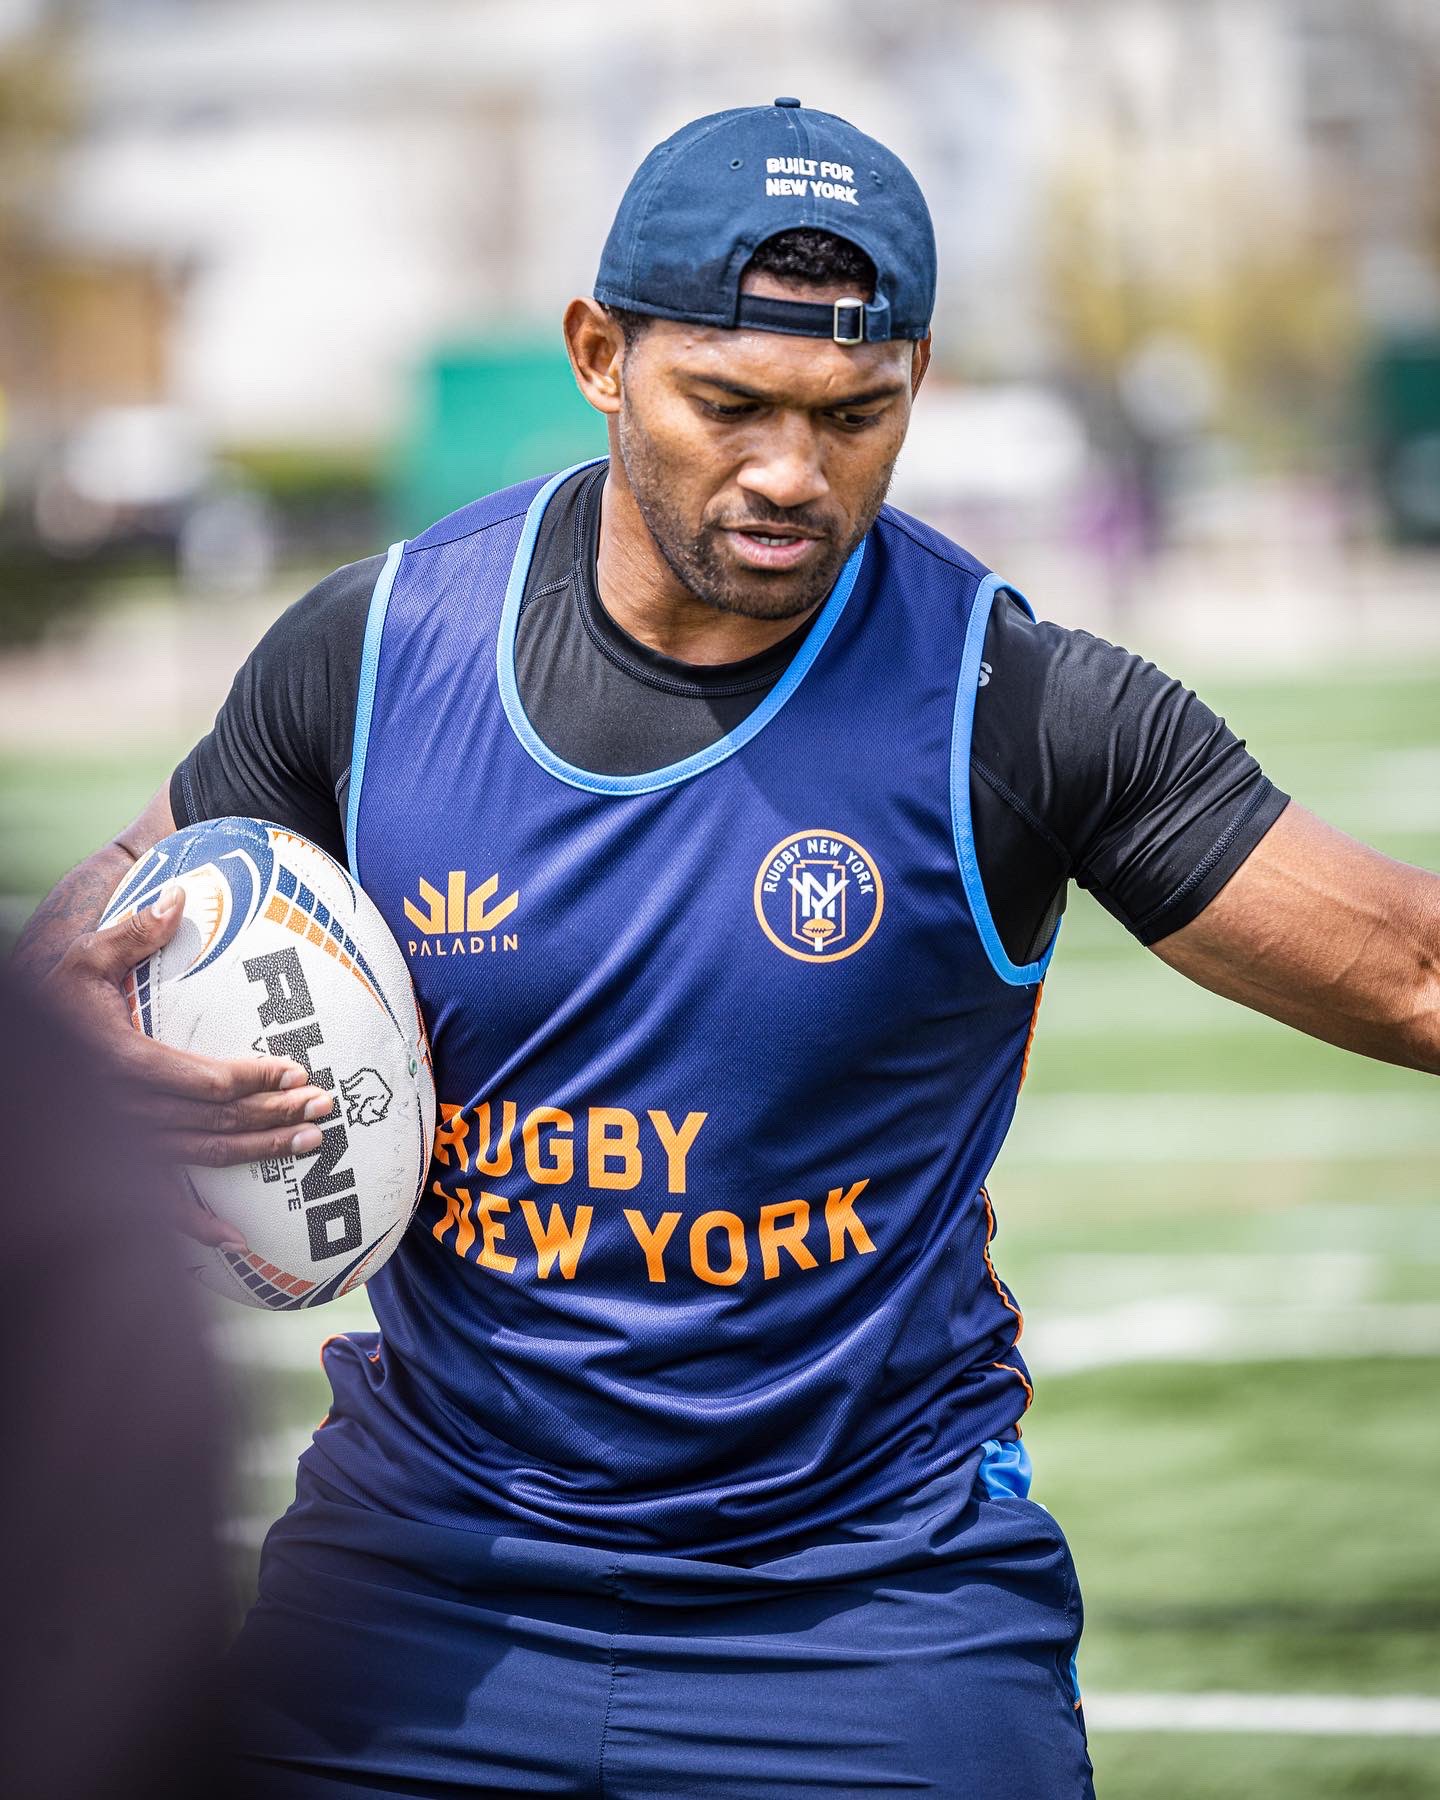 Rugby New York on Twitter